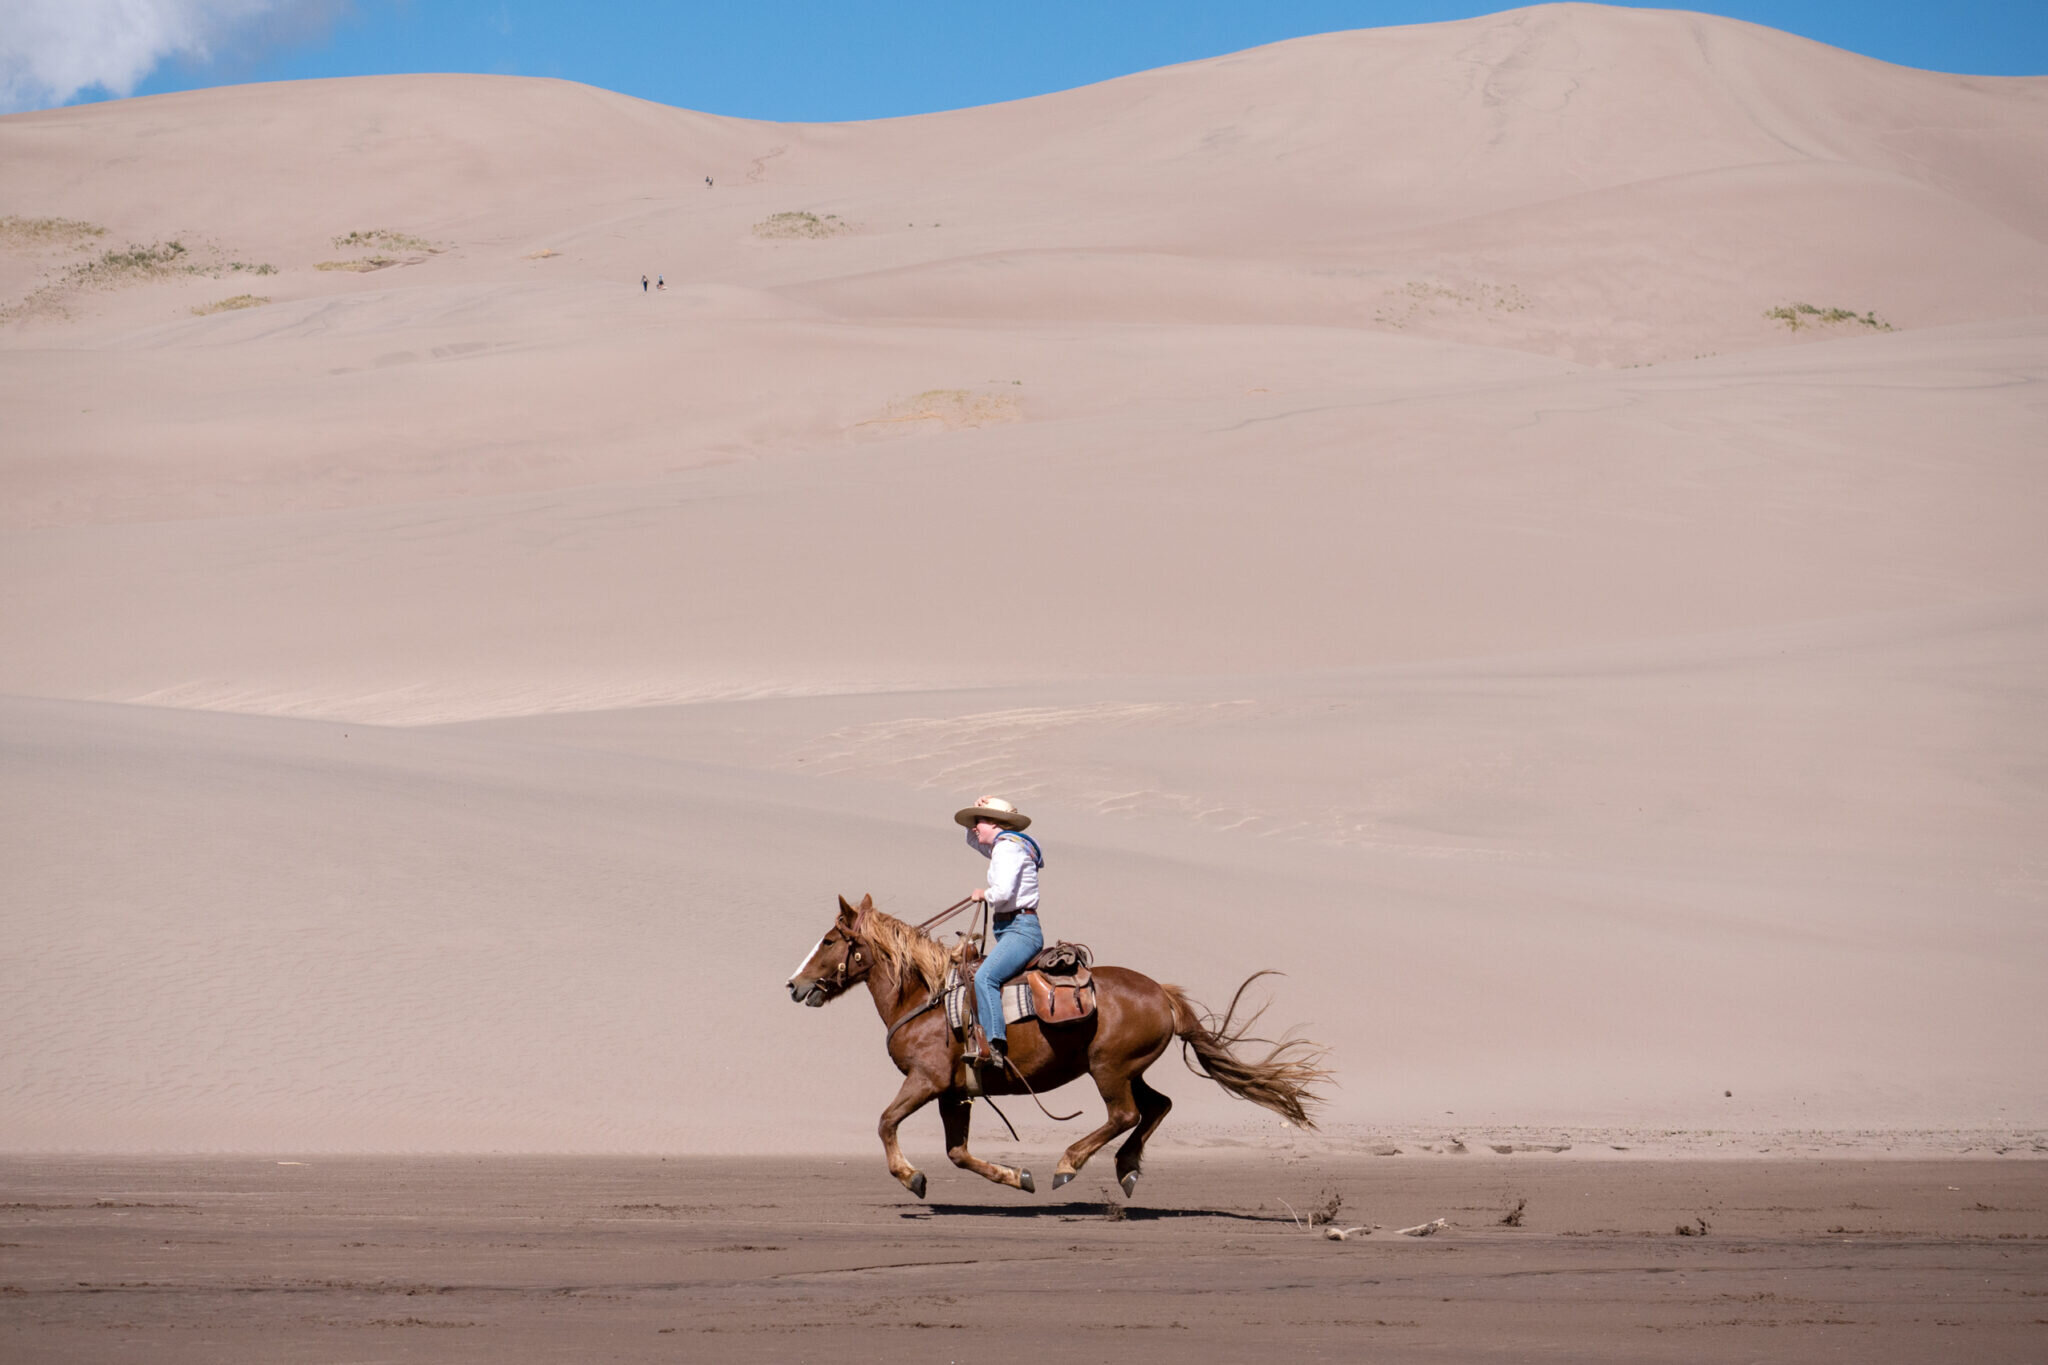 Galloping across the Great Sand Dunes (Copy) (Copy) (Copy)